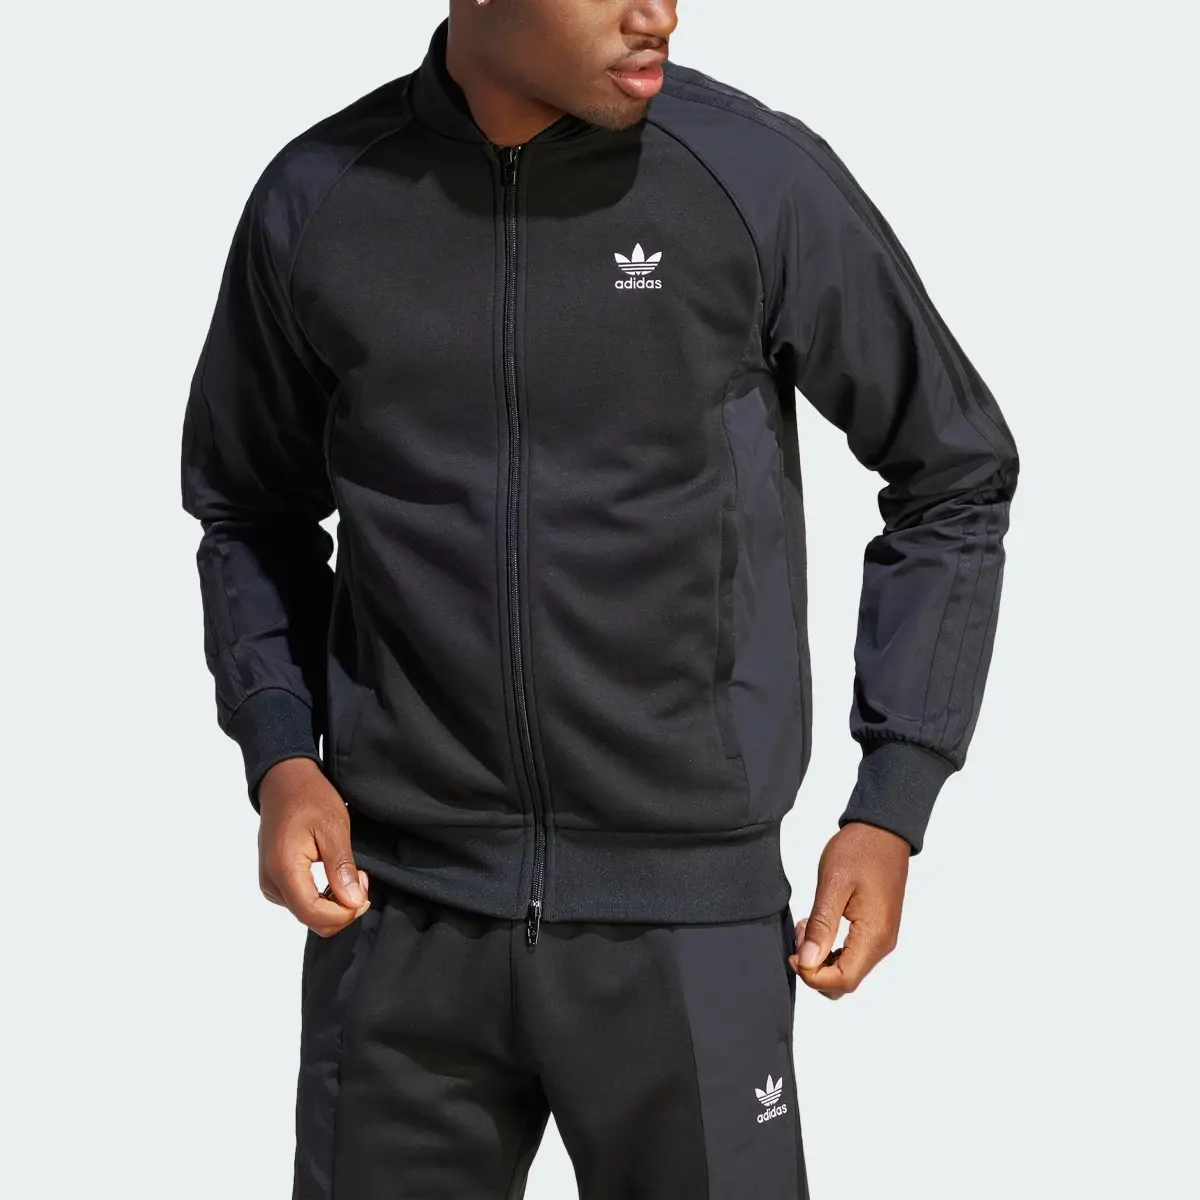 Adidas Adicolor Re-Pro SST Material Mix Track Jacket. 1